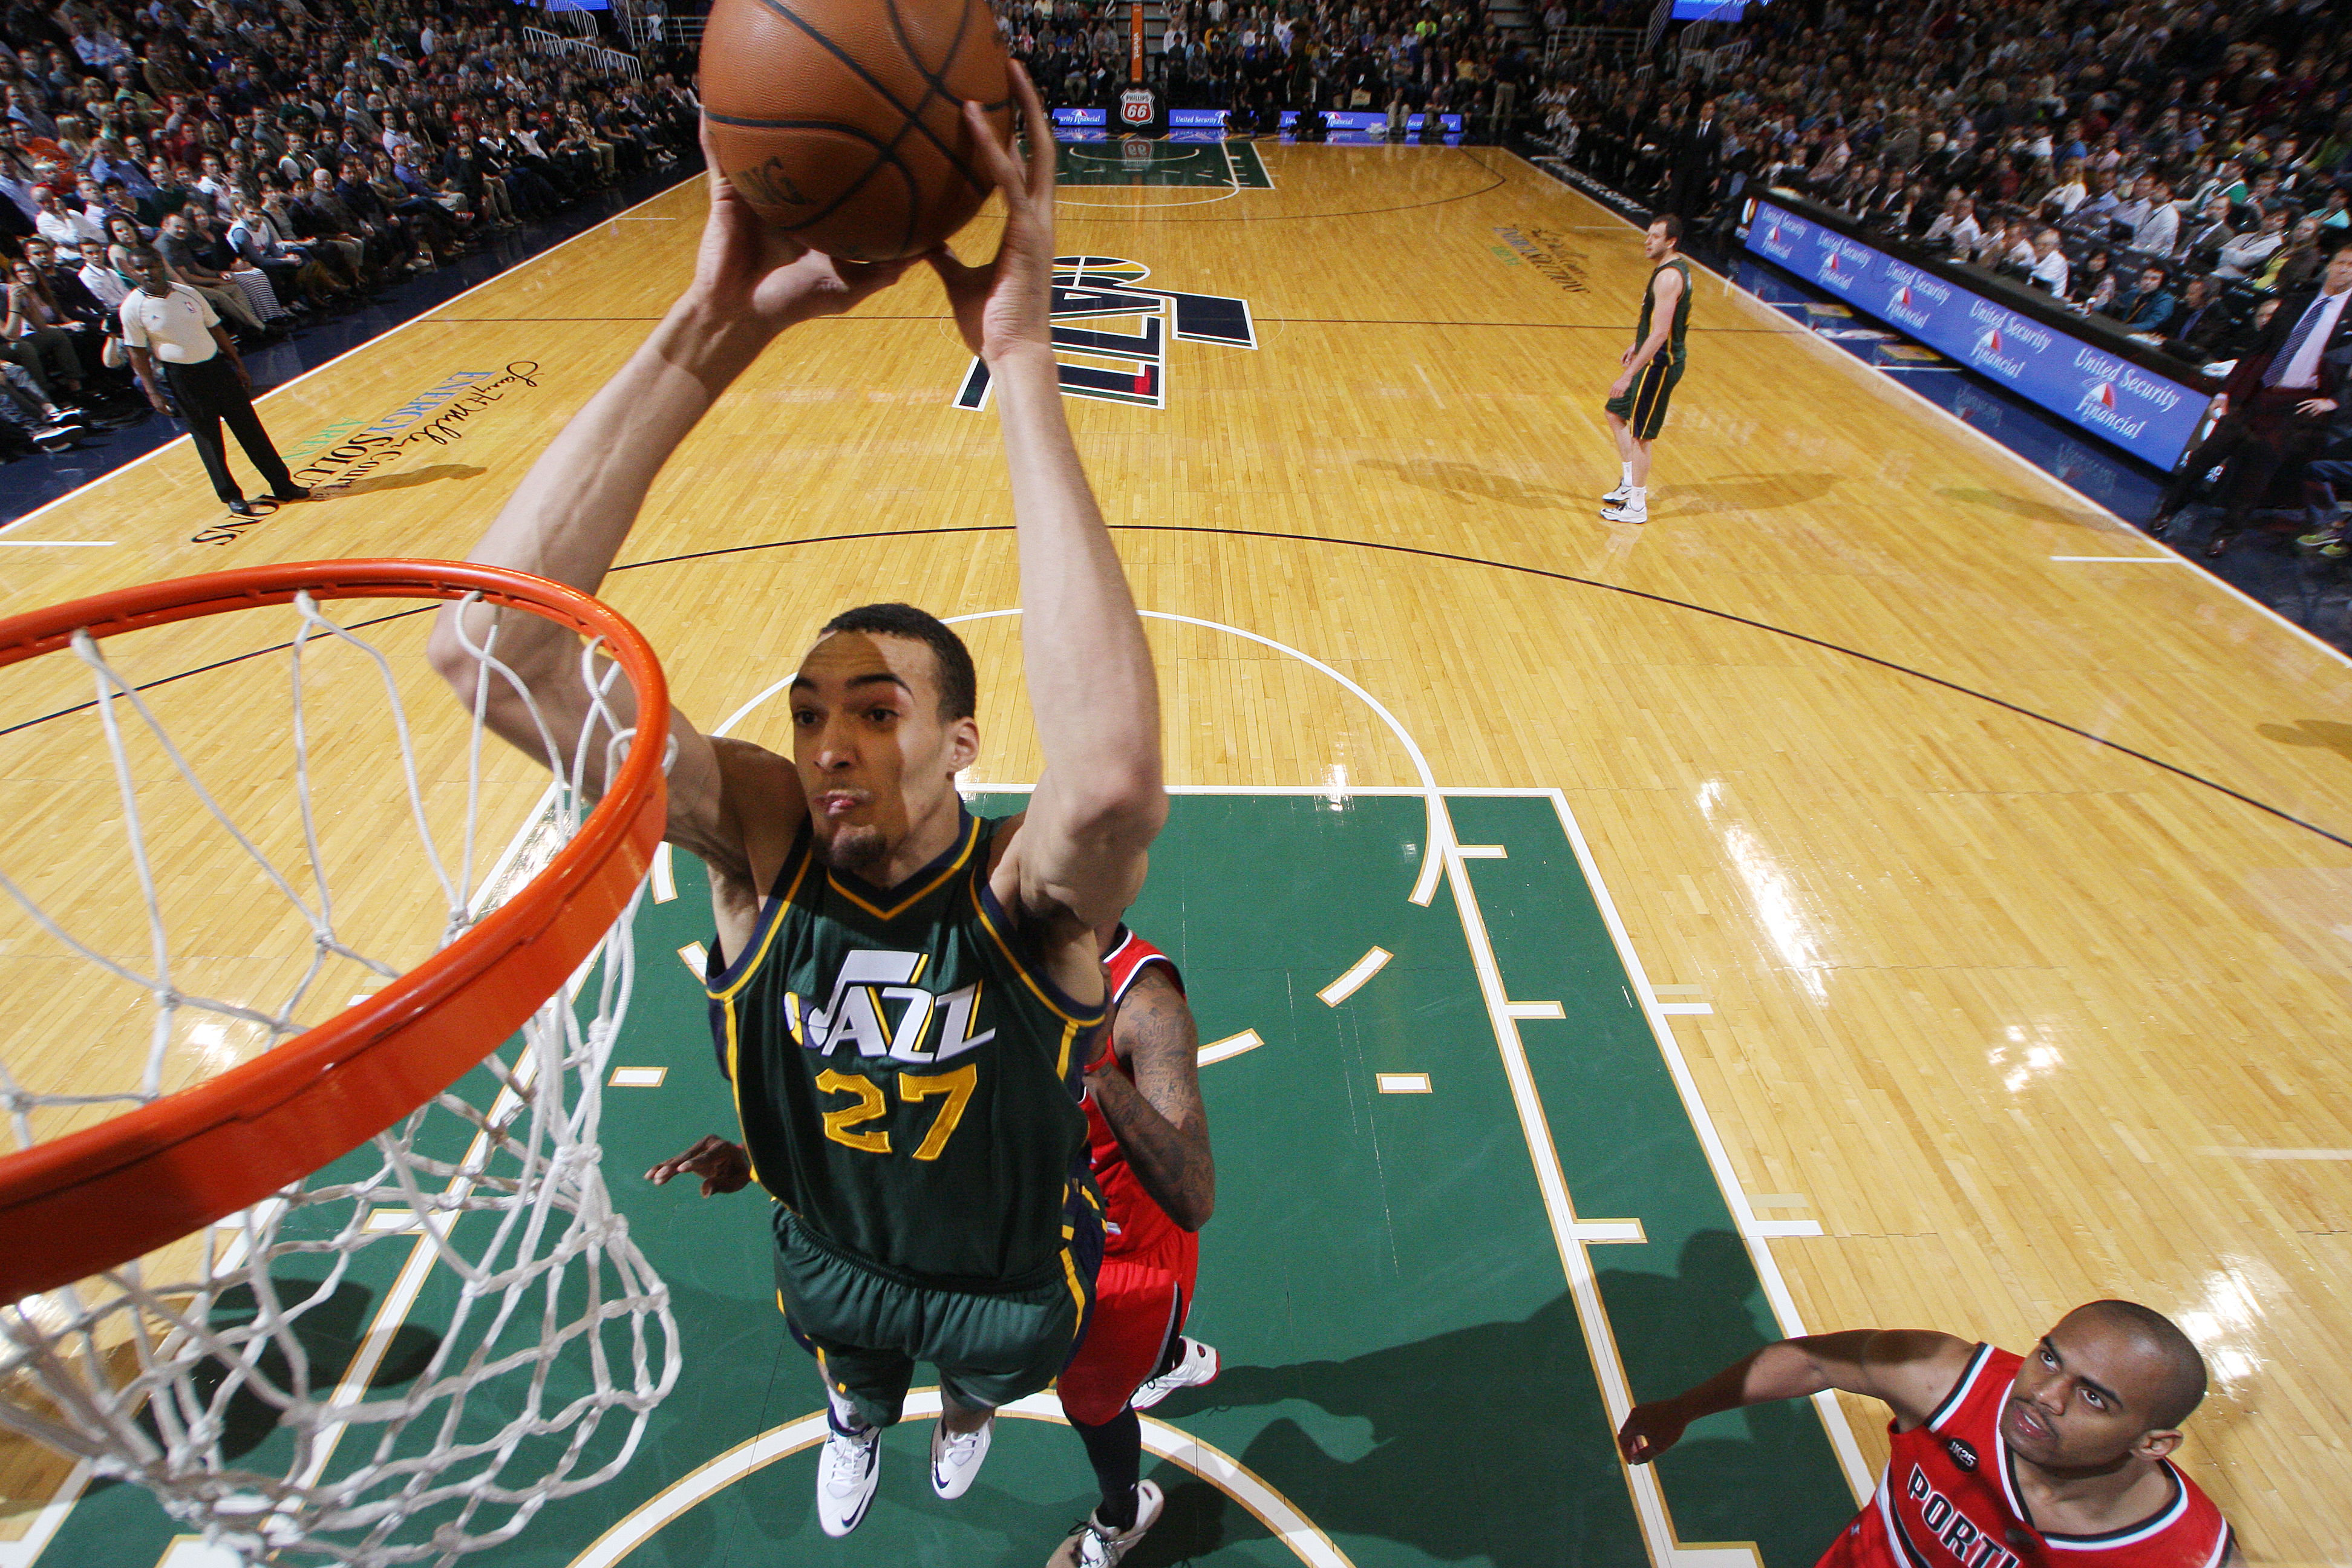 SALT LAKE CITY, UT - MARCH 25: Rudy Gobert #27 of the Utah Jazz shoots against the Portland Trail Blazers on March 25, 2015 at EnergySolutions Arena in Salt Lake City, Utah. NOTE TO USER: User expressly acknowledges and agrees that, by downloading and or using this photograph, User is consenting to the terms and conditions of the Getty Images License Agreement. Mandatory Copyright Notice: Copyright 2015 NBAE (Photo by Melissa Majchrzak/NBAE via Getty Images)